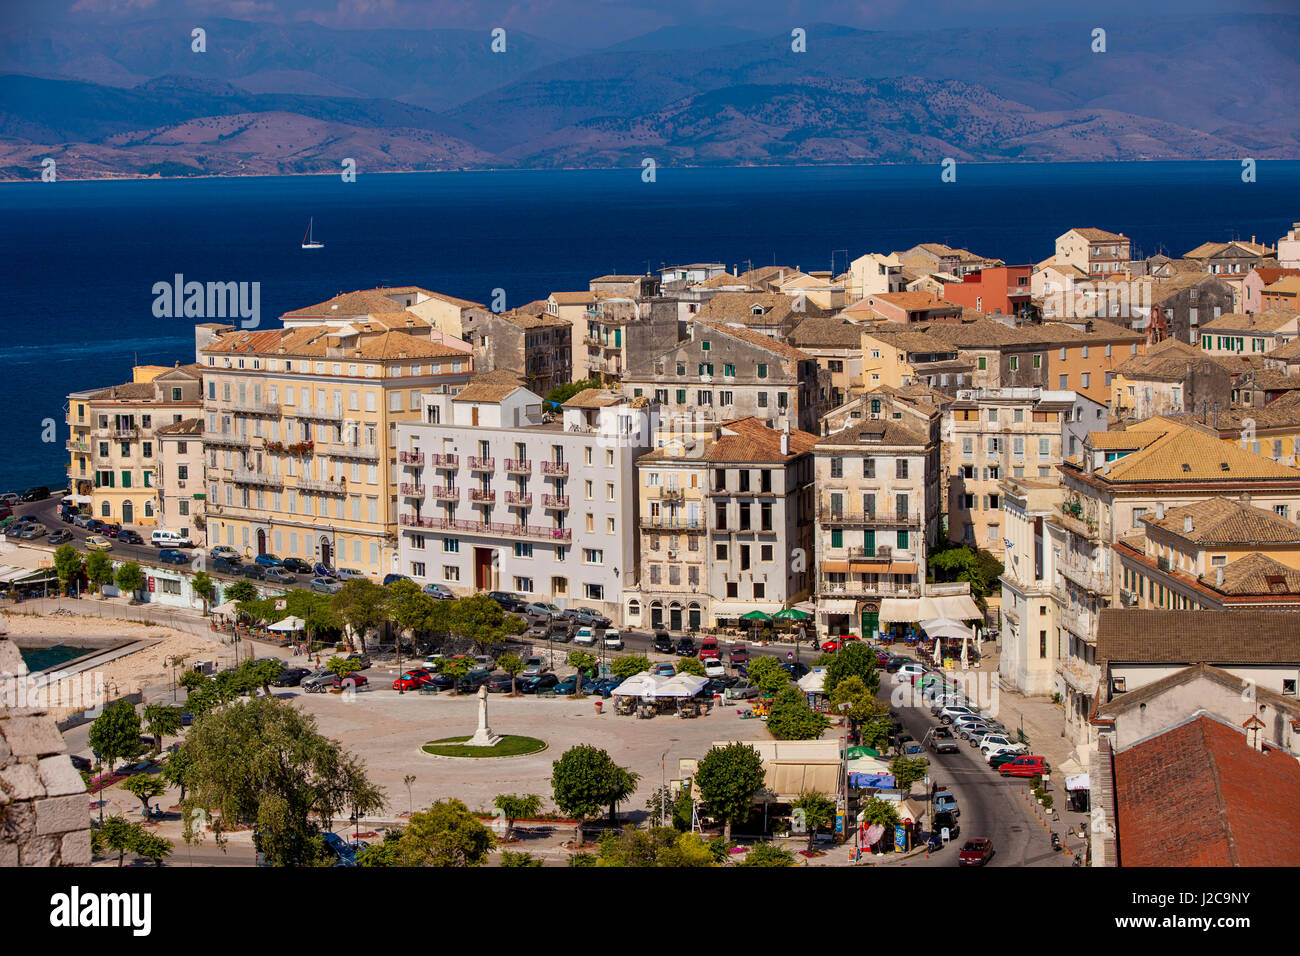 View overlooking Town Square and Buildings of Corfu Town (Kerkyra) on the Ionian Island of Corfu, Greece Stock Photo